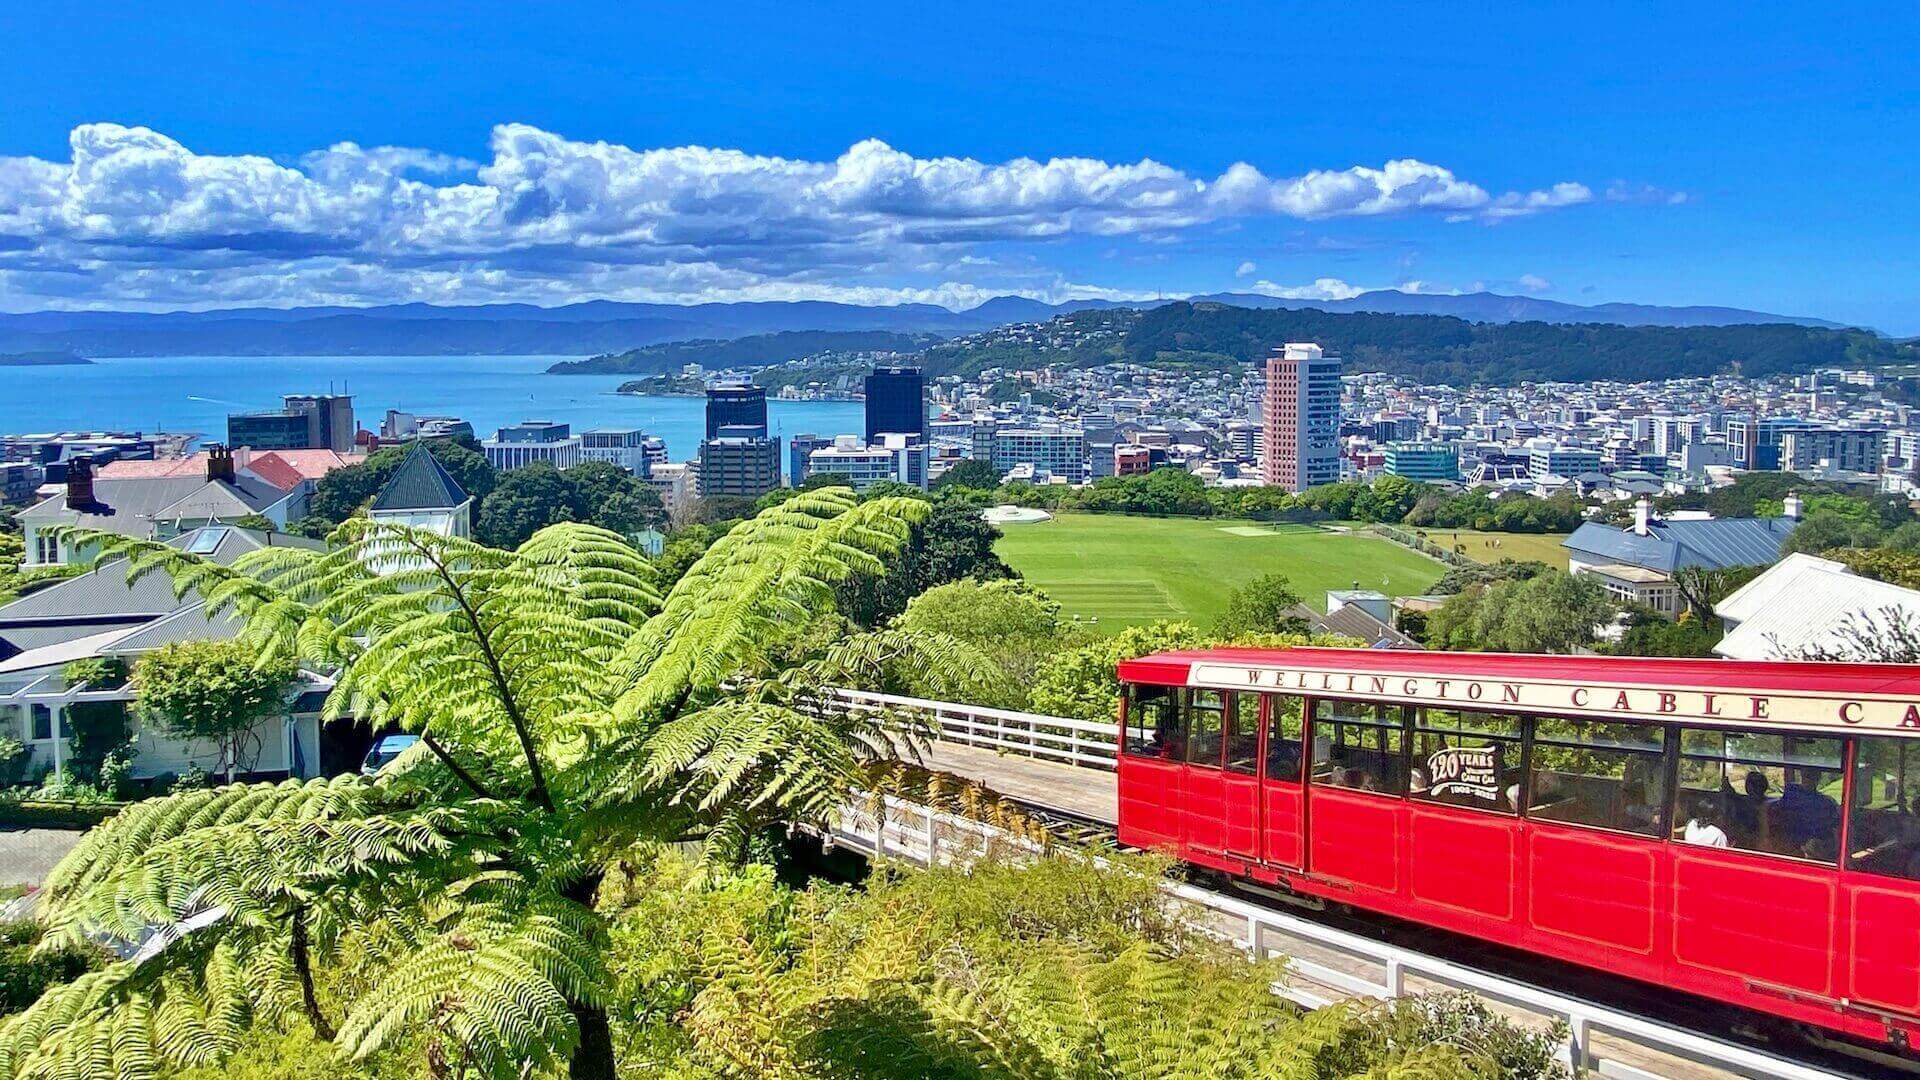 Things to Do in Wellington: 25 Amazing Activities for an Unforgettable Trip